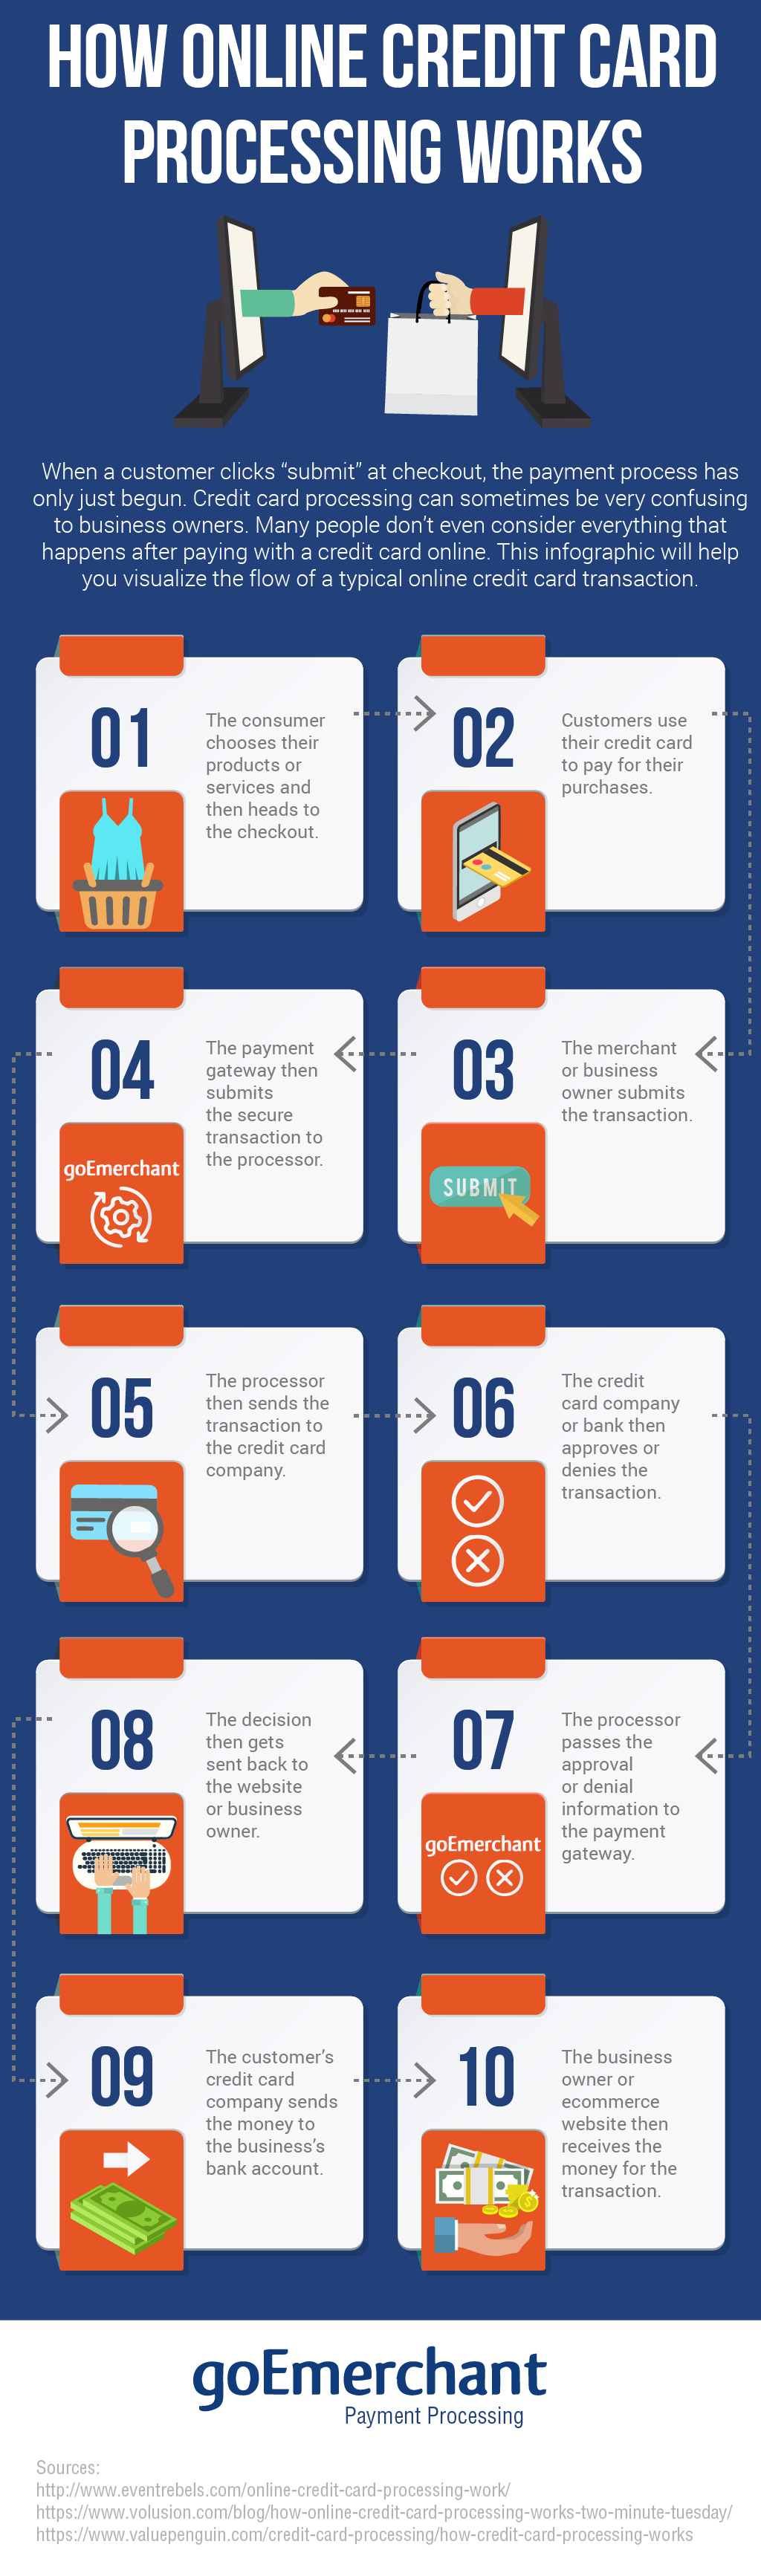 How Credit Card Processing Works